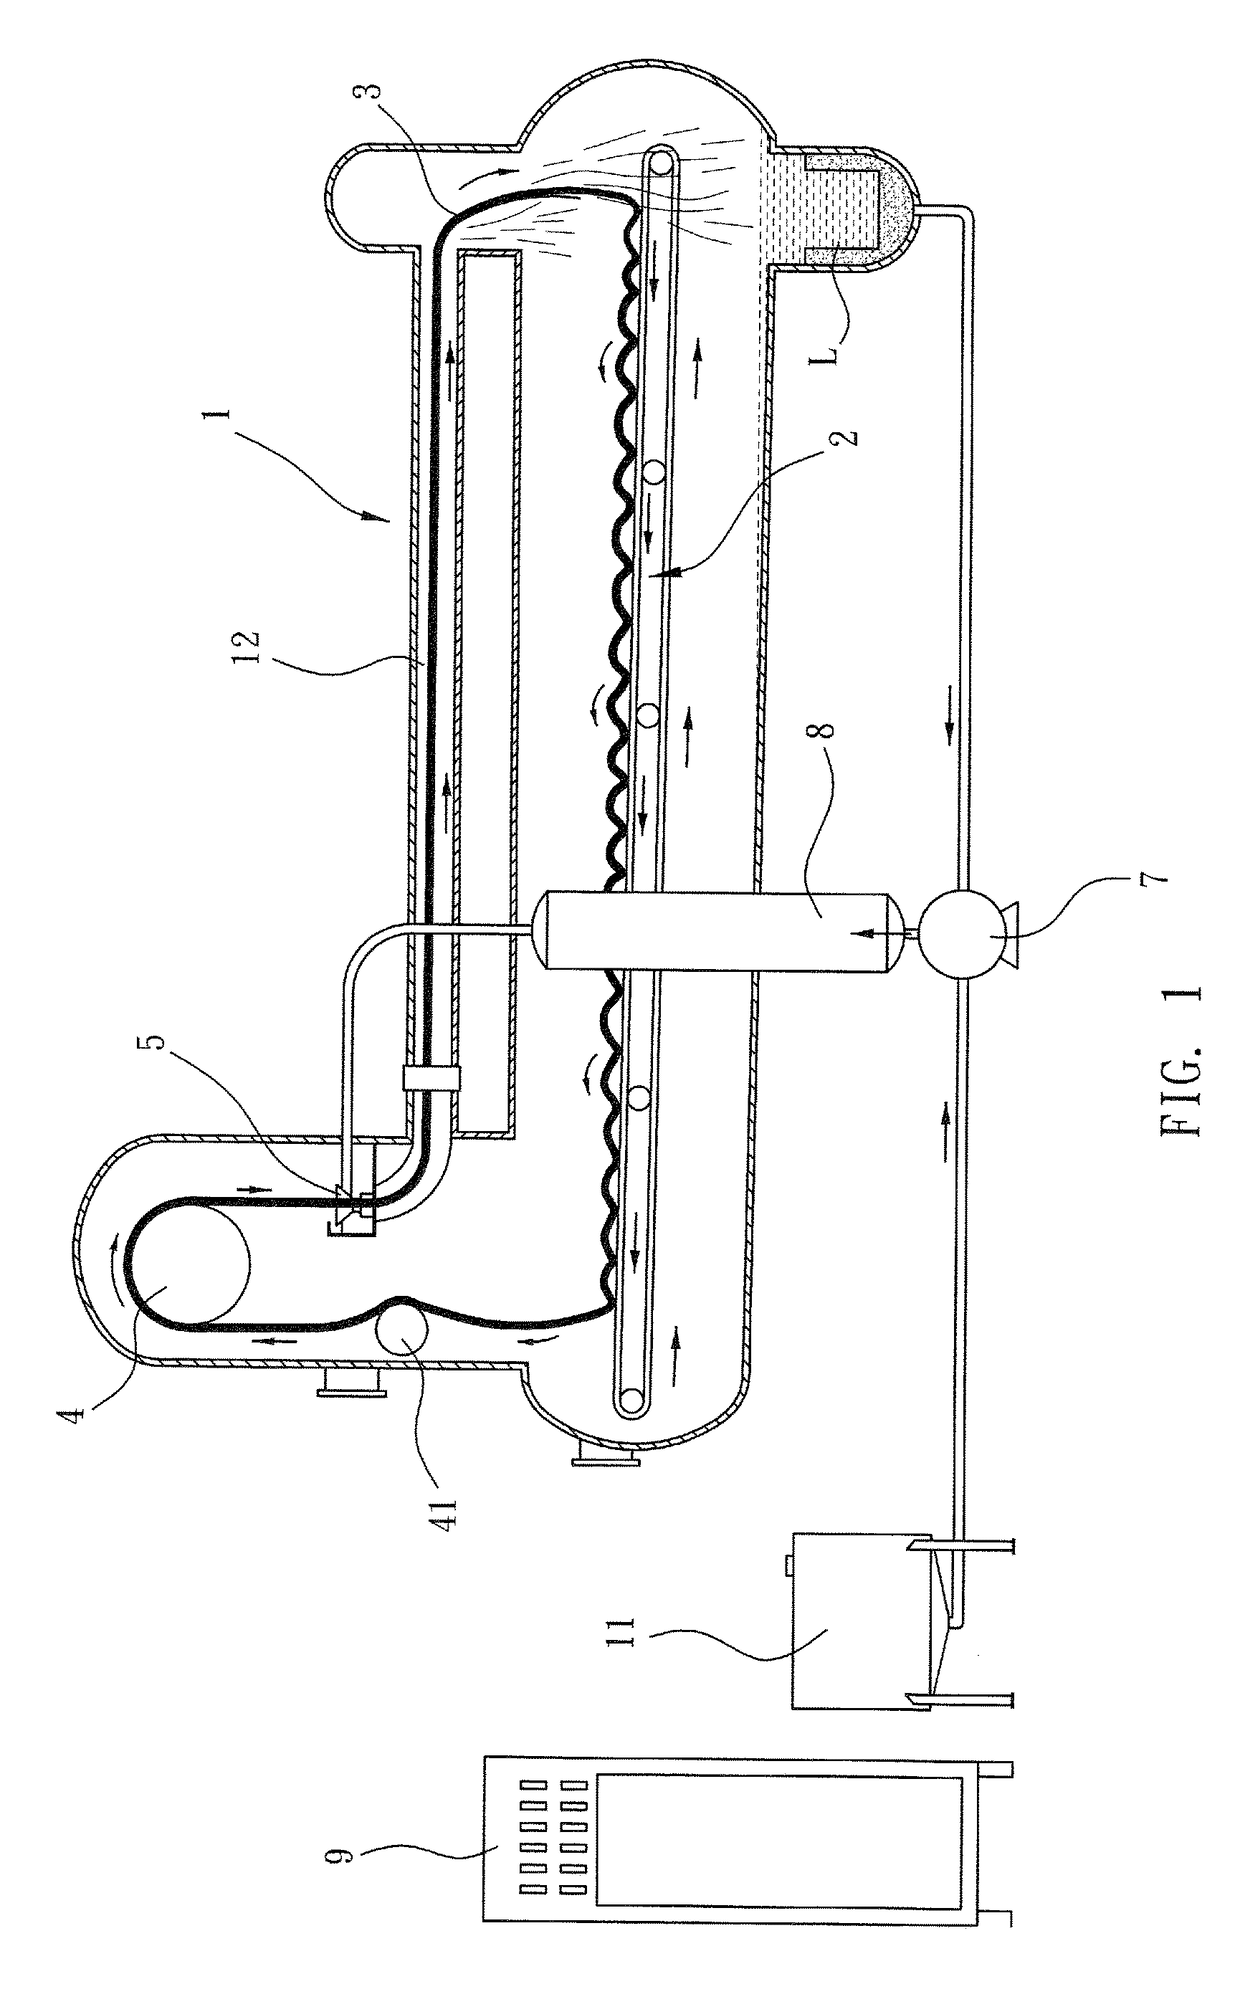 Control method for synchronized fabric circulation in conveyor drive fabric dyeing machine